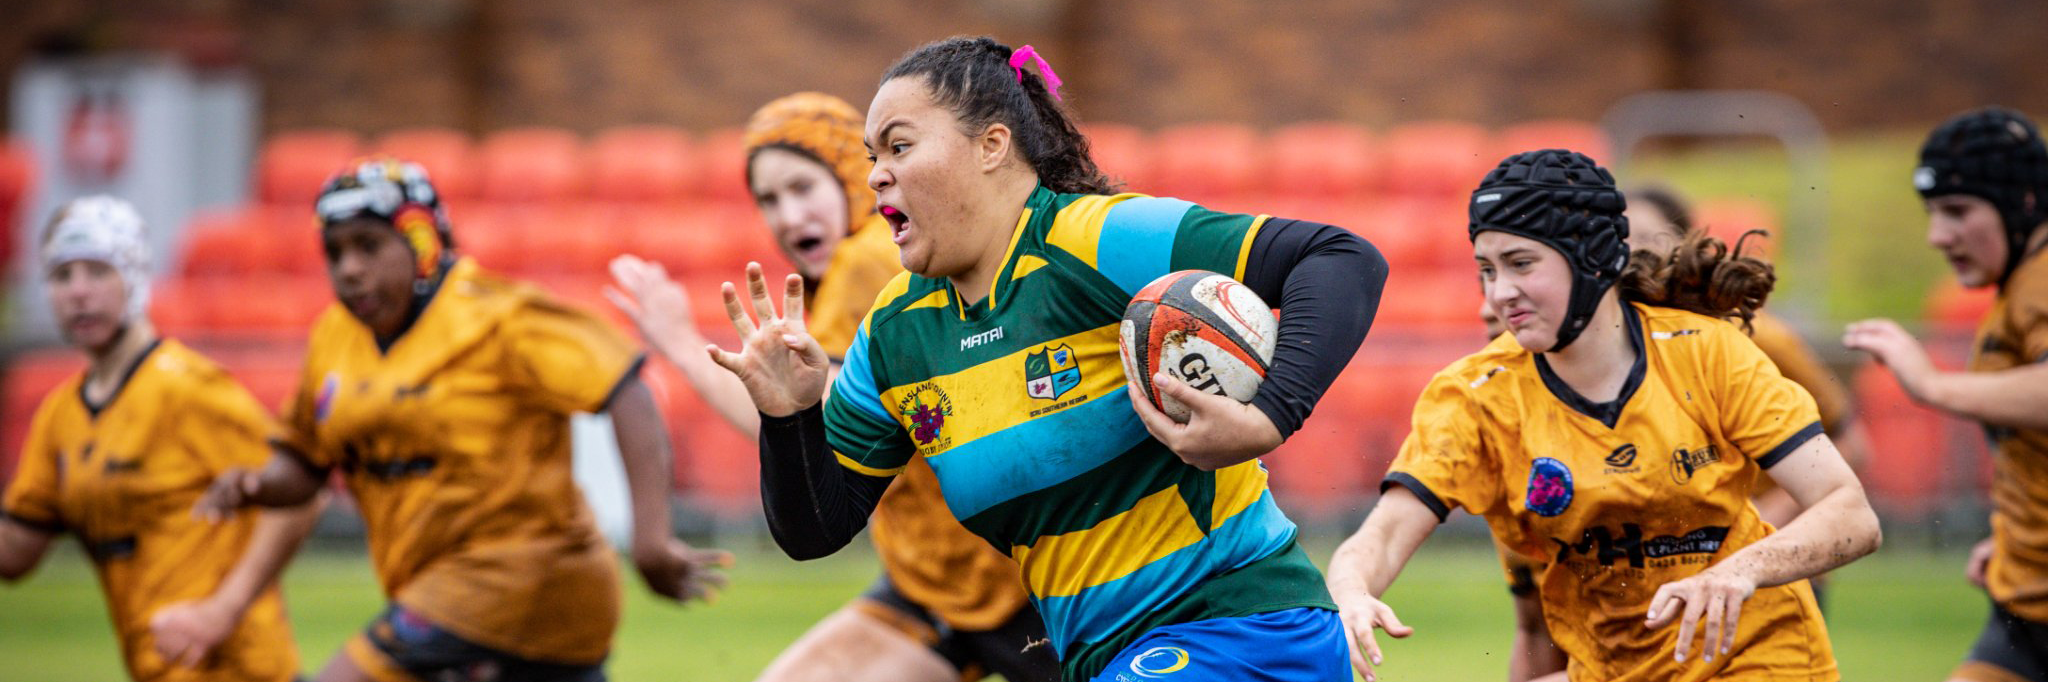 Girls playing Rugby Union